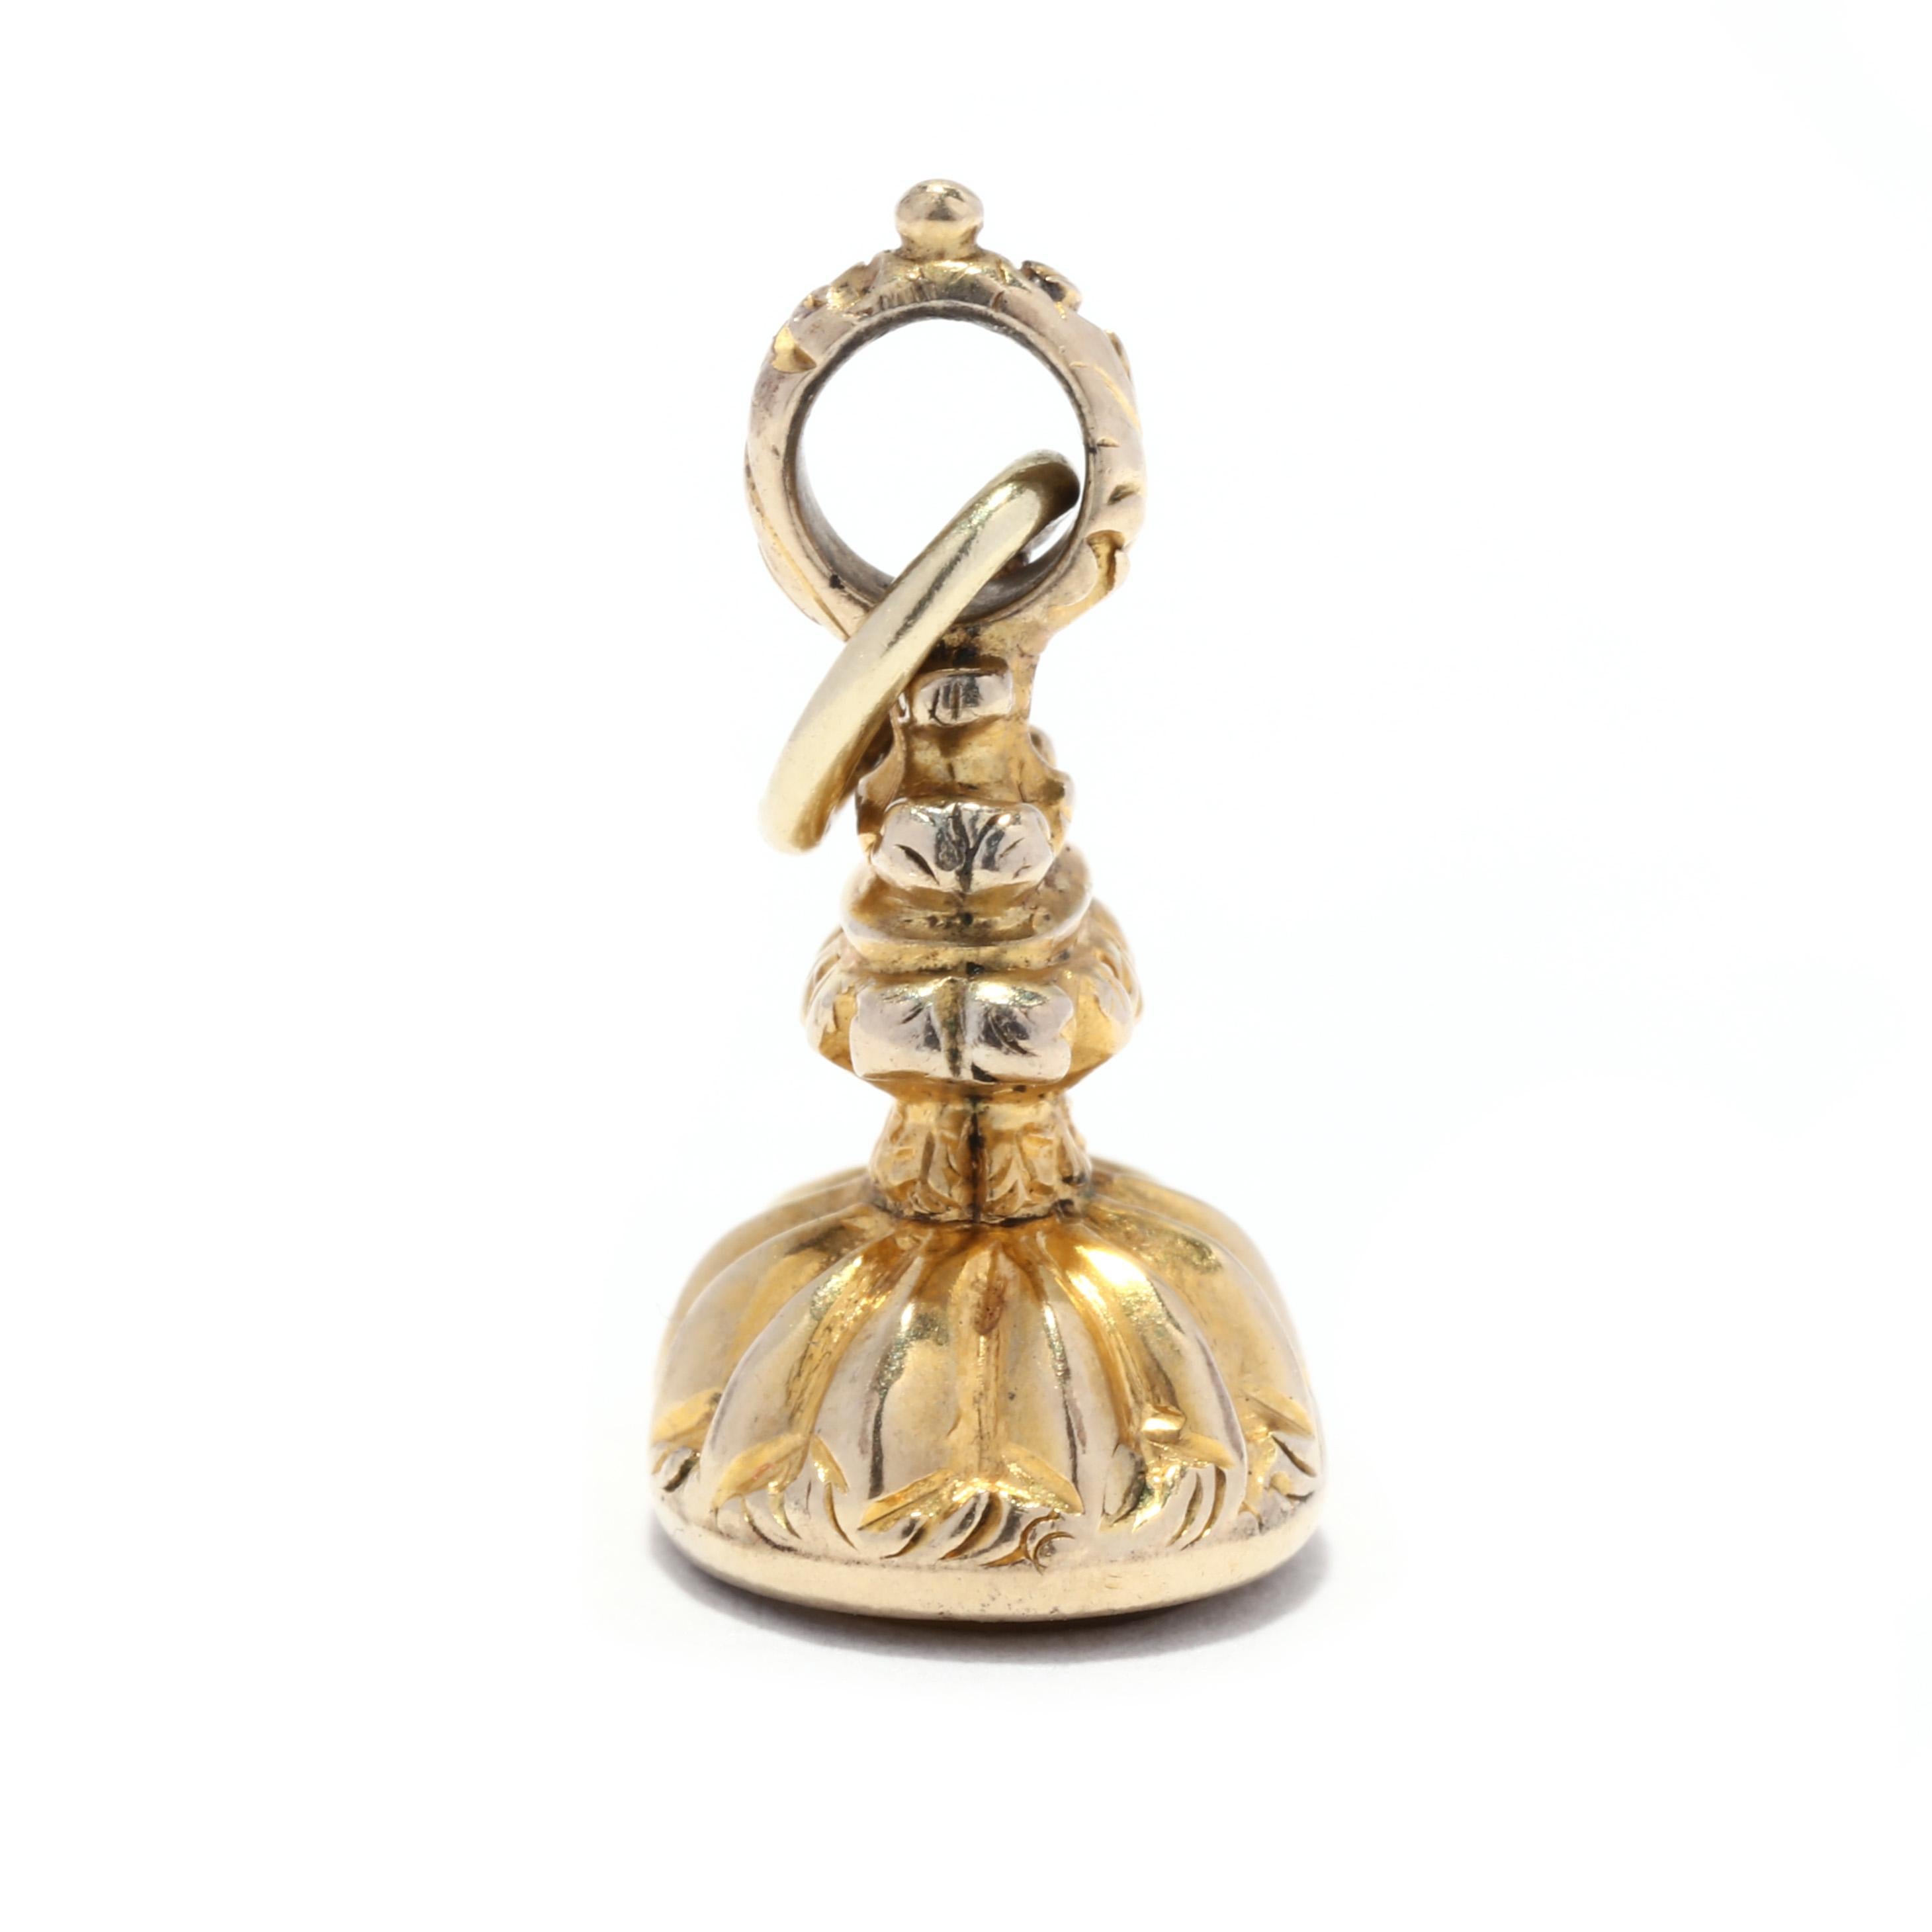 A Victorian 10 karat yellow gold citrine intaglio watch fob charm. This mini charm features an ornately engraved watch fob charm with a bezel set, oval cut citrine intaglio on the base and a thin bail.

Stones:
- citrine, 1 stone
- oval cut
- 9 x 7